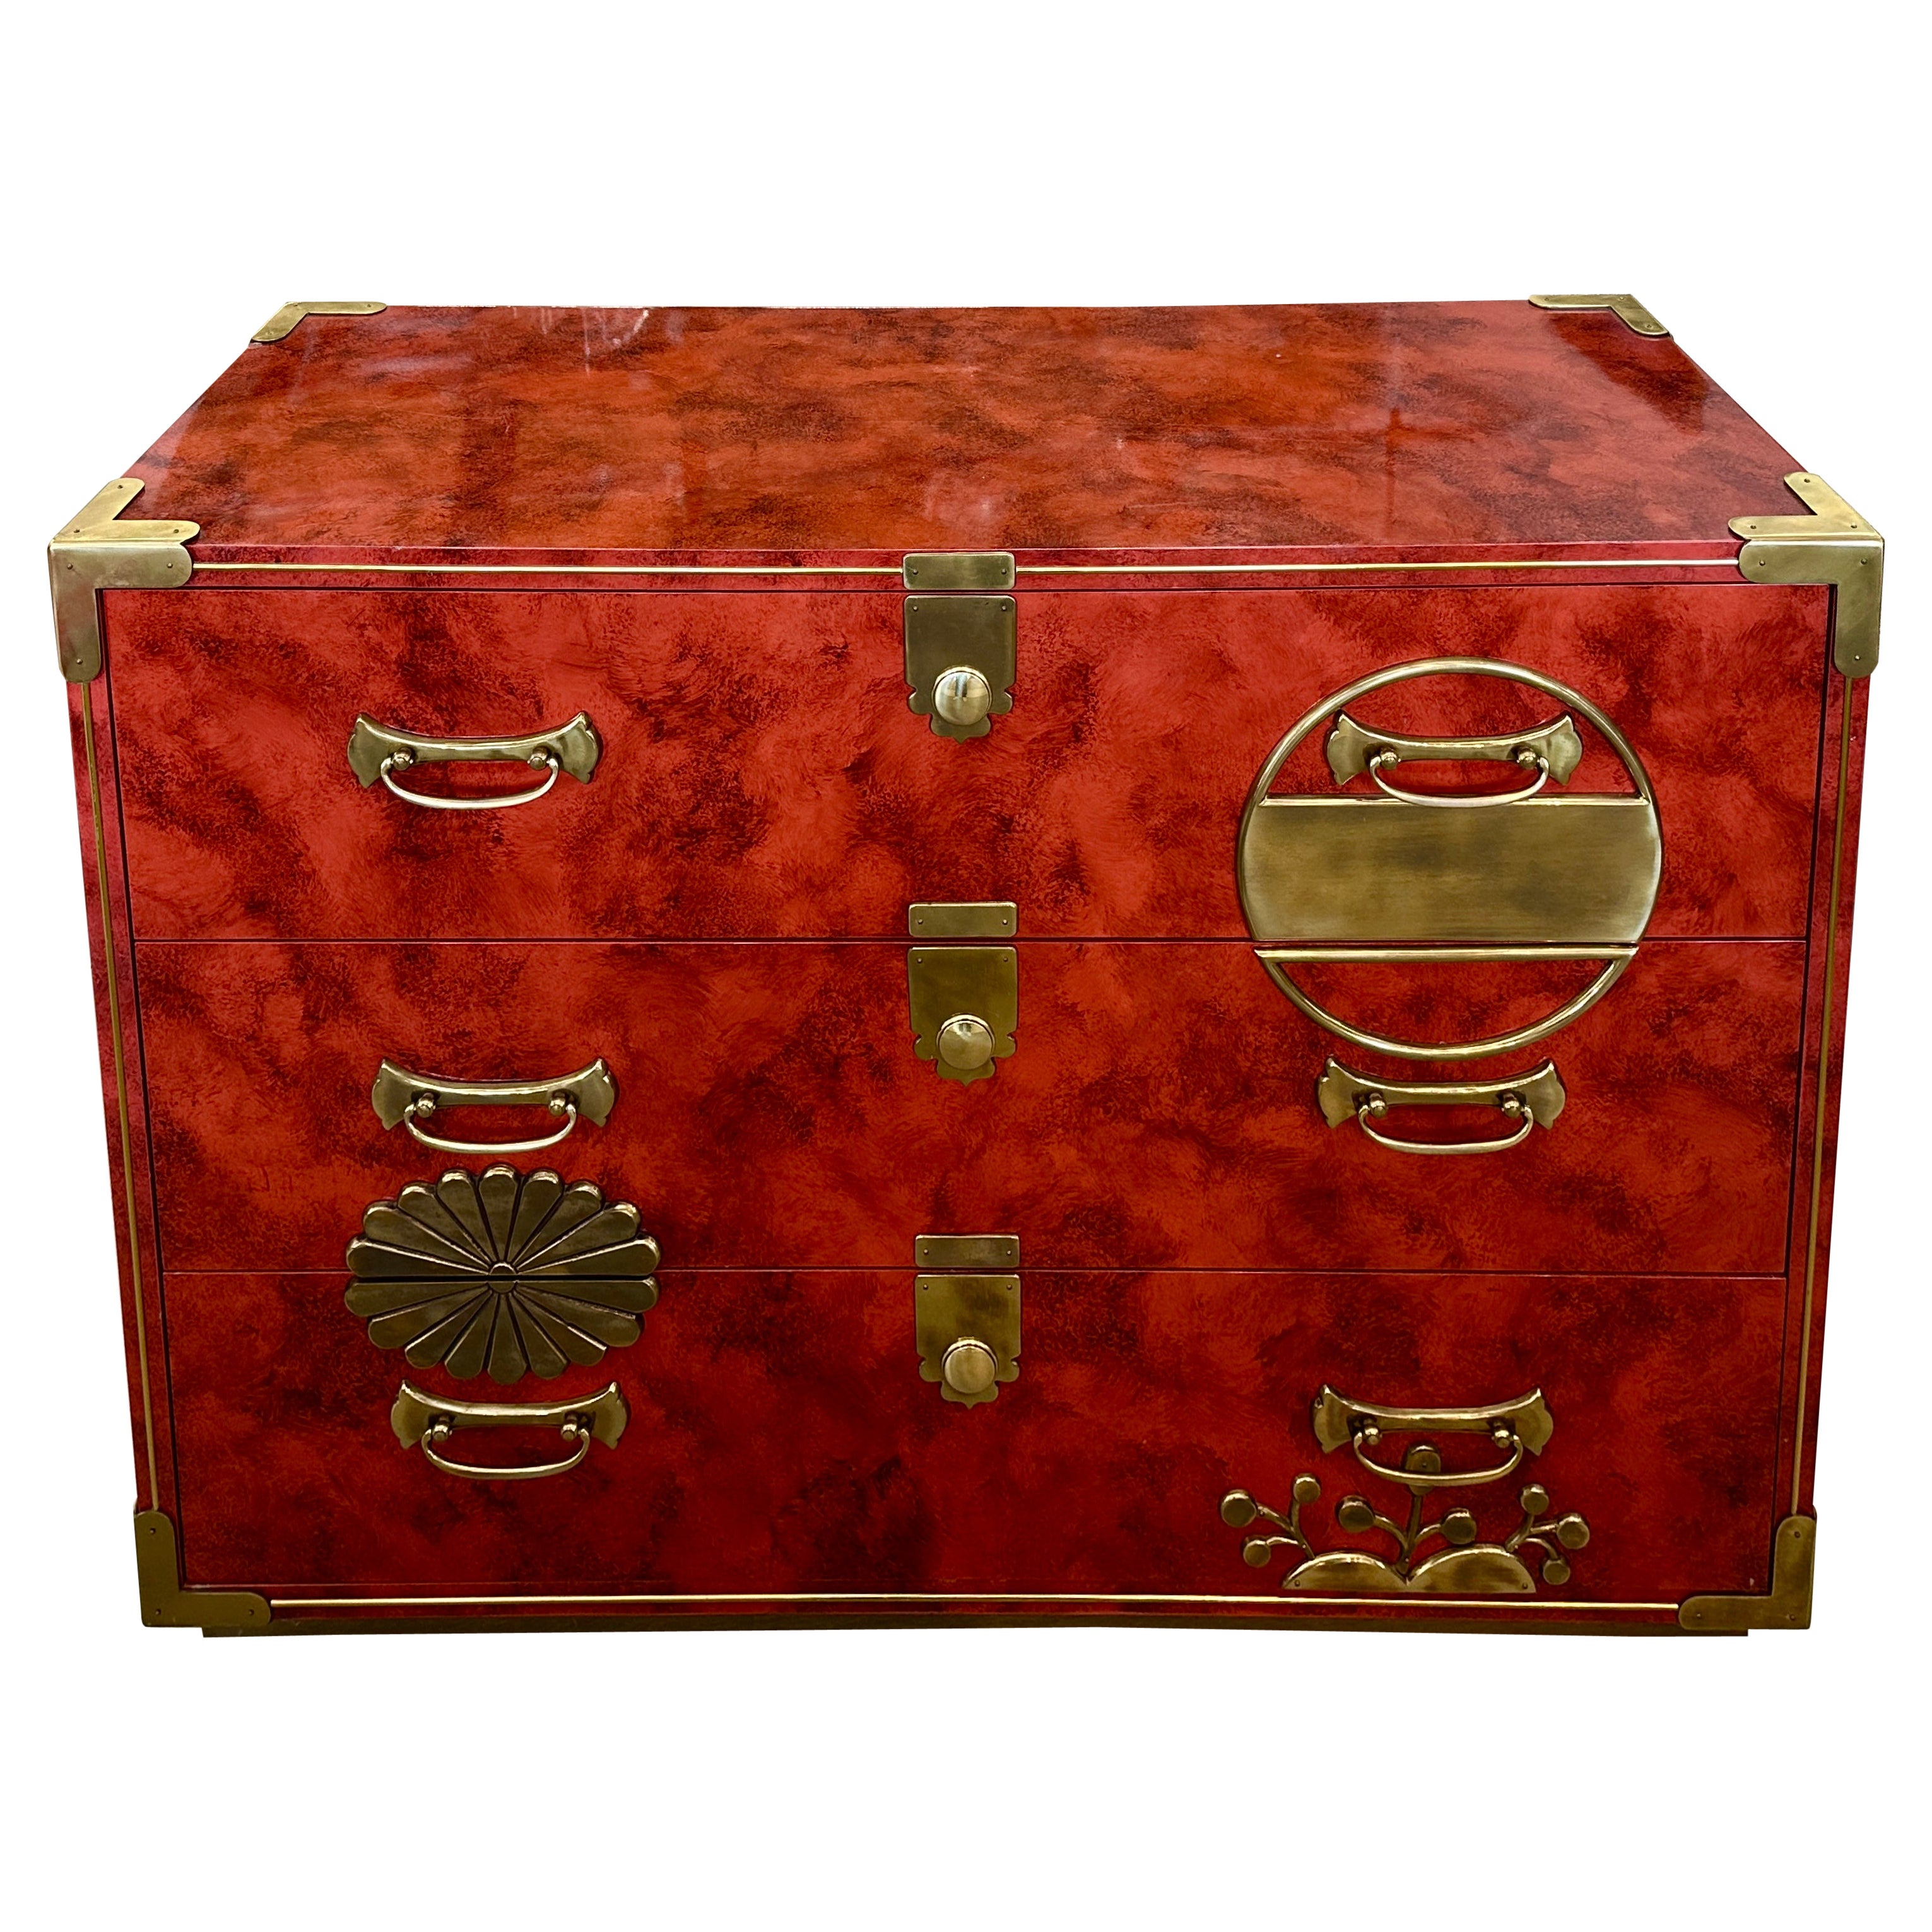 Stunning Coral Red Lacquer & Brass Mastercraft Asian Chest